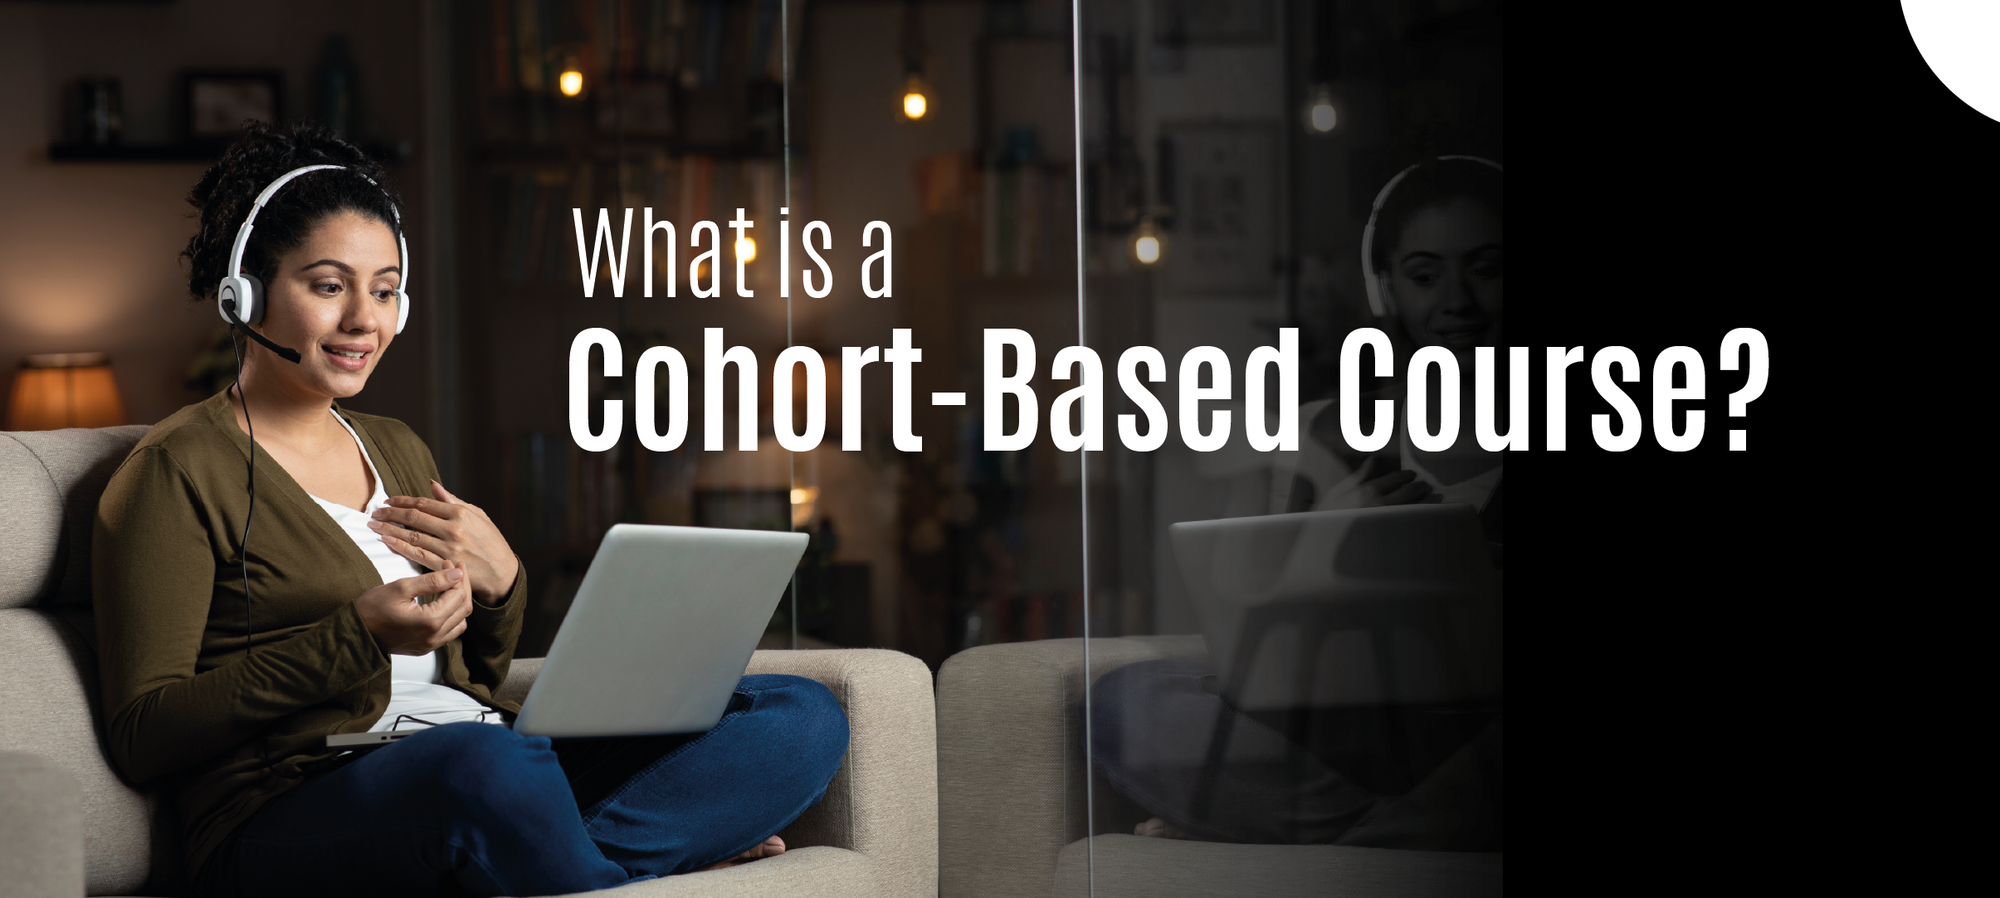 Cohort-based courses are the niche that you need to create for yourself. 